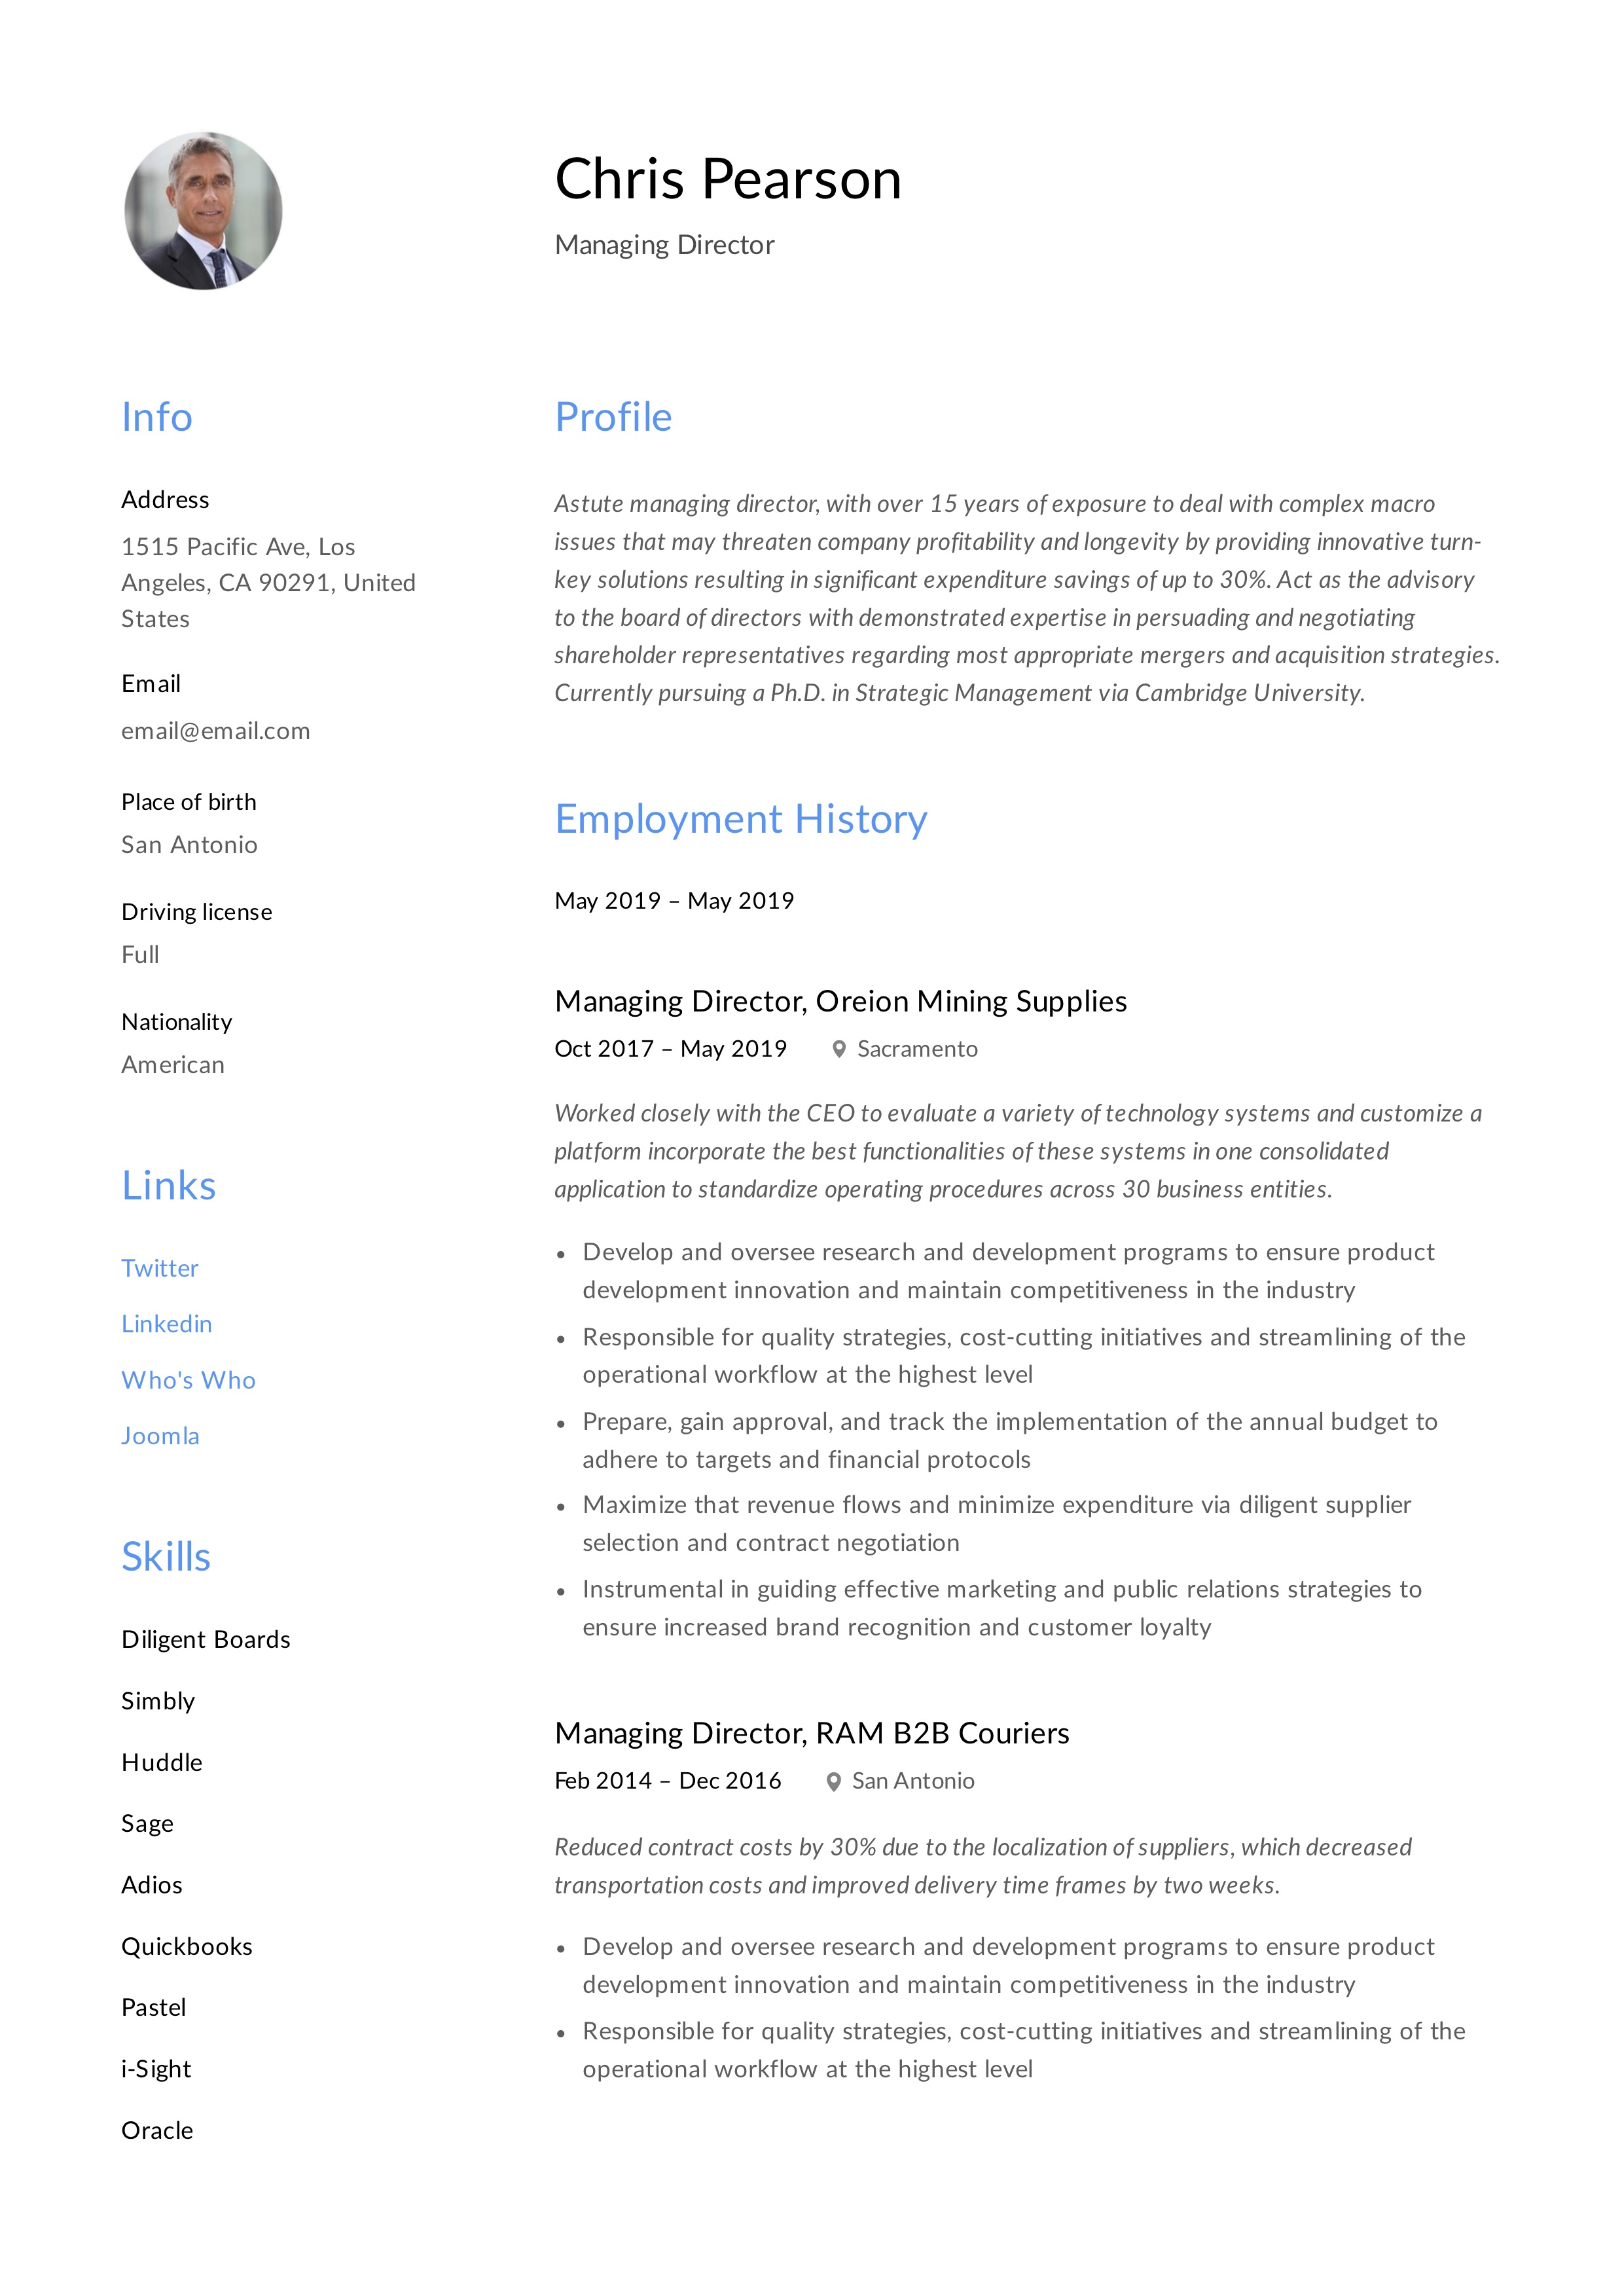 Managing Director Resume with creative twist